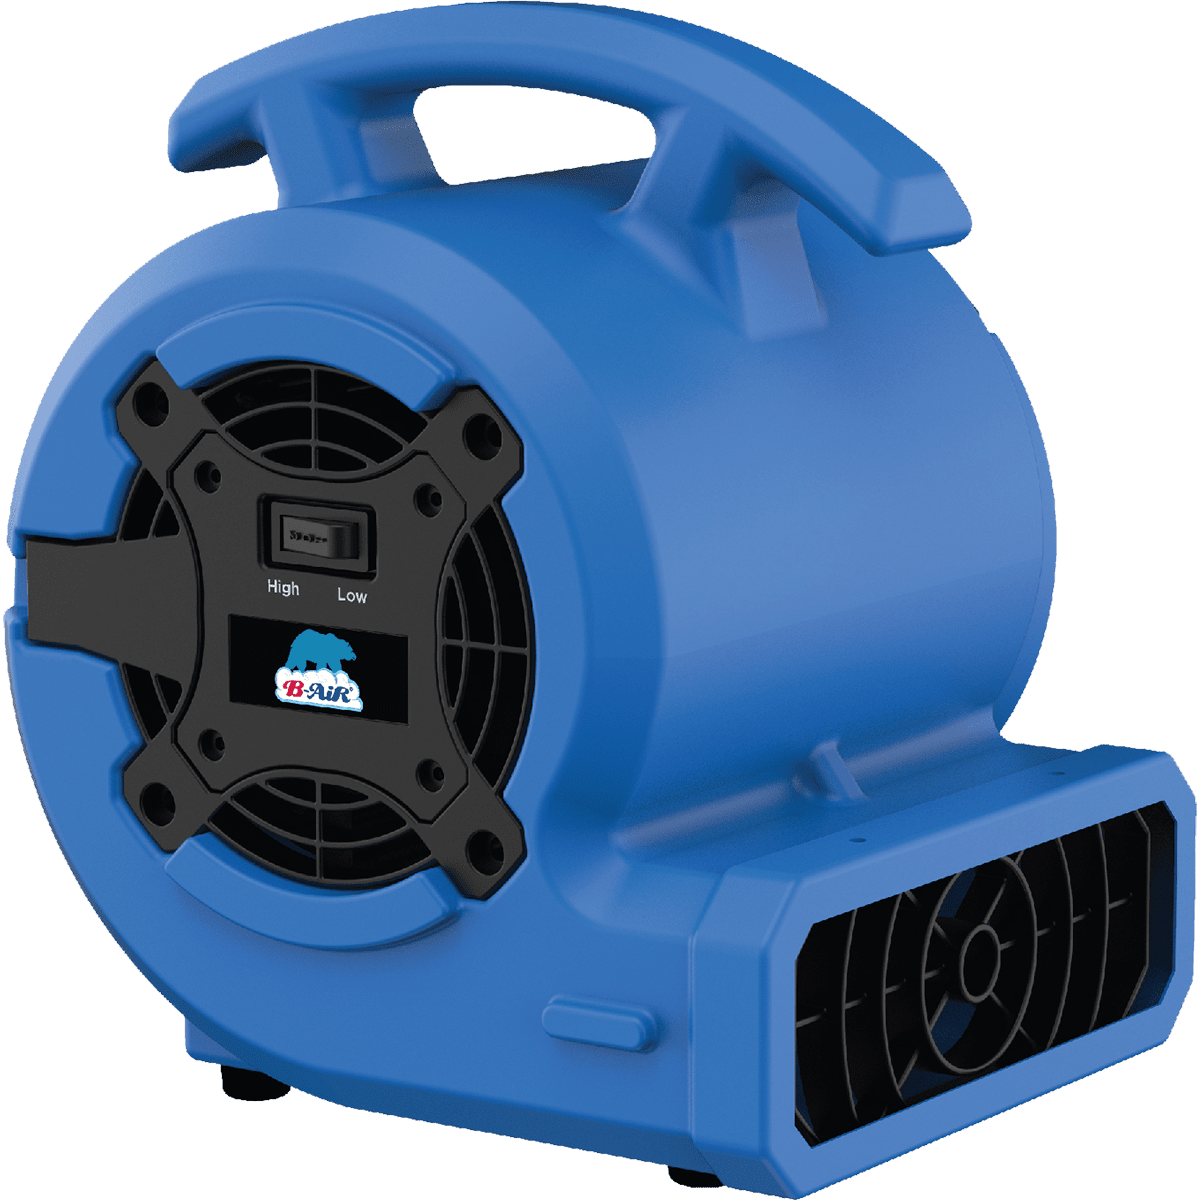 Comfort Zone 1 HP High Velocity Air Mover Carpet Dryer Blower Fan